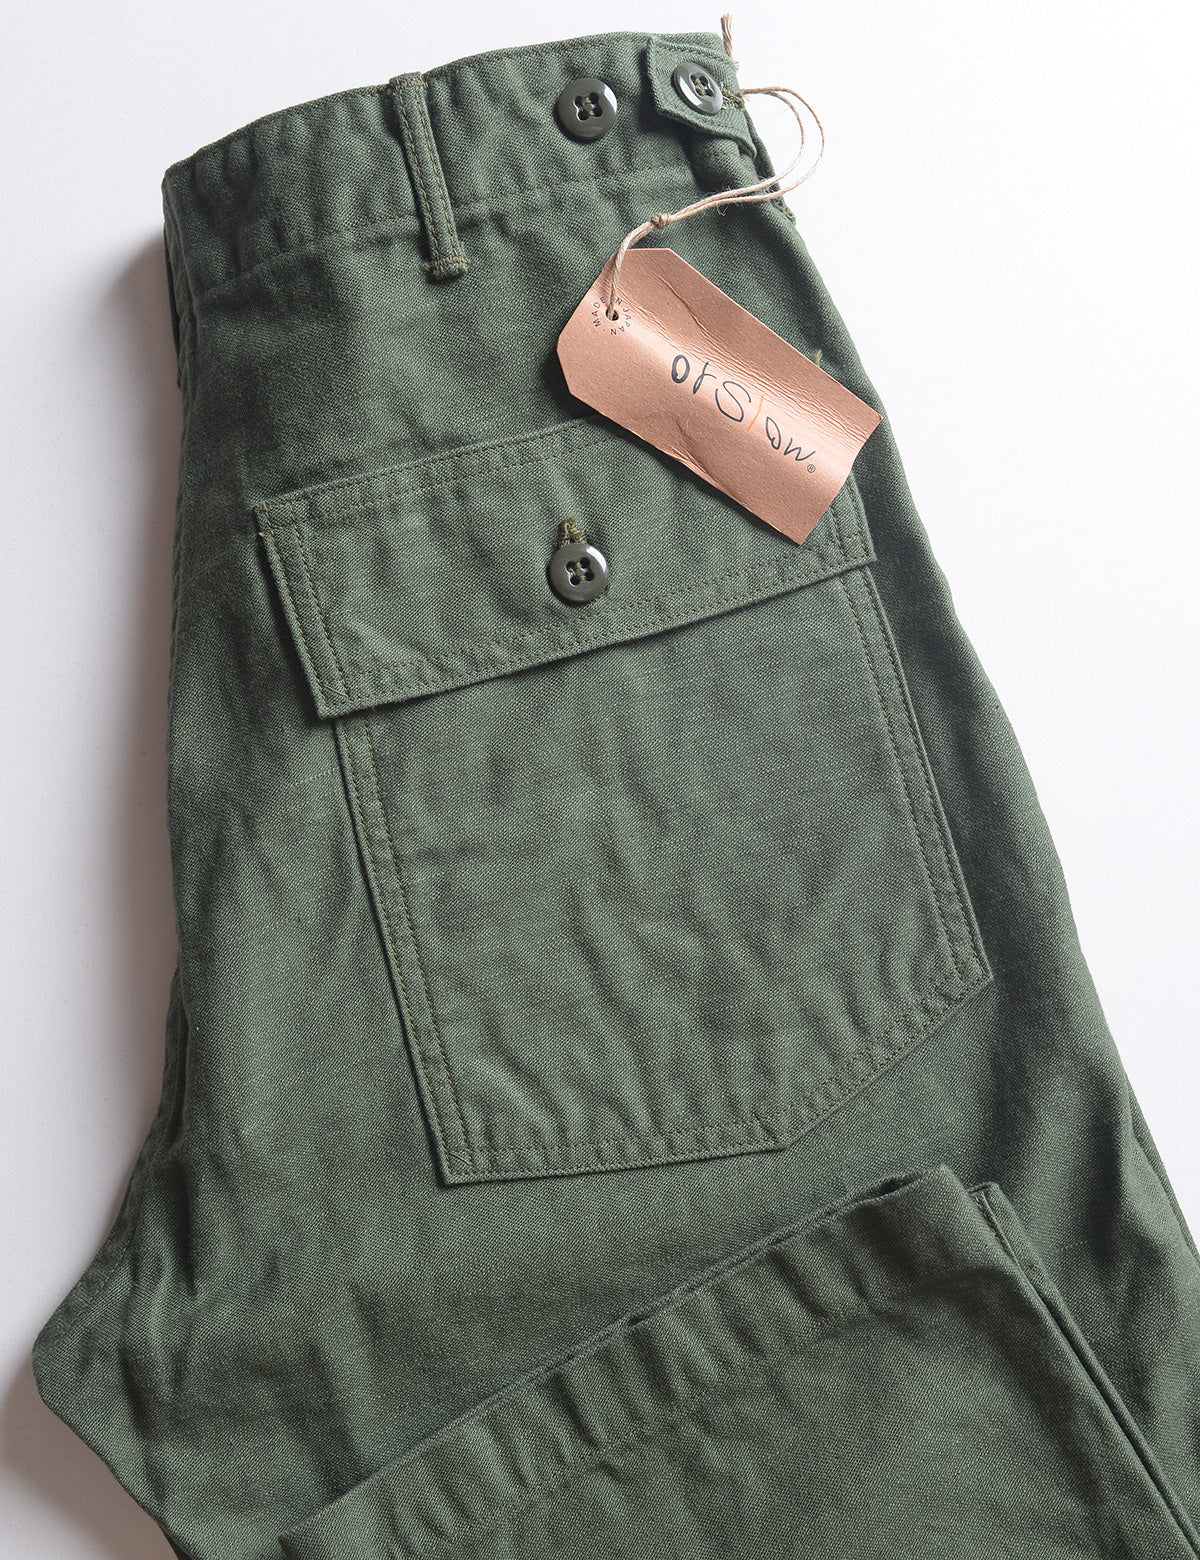 Folded detail of Orslow US Army Fatigue Trousers - Army Green showing back pocket and tag